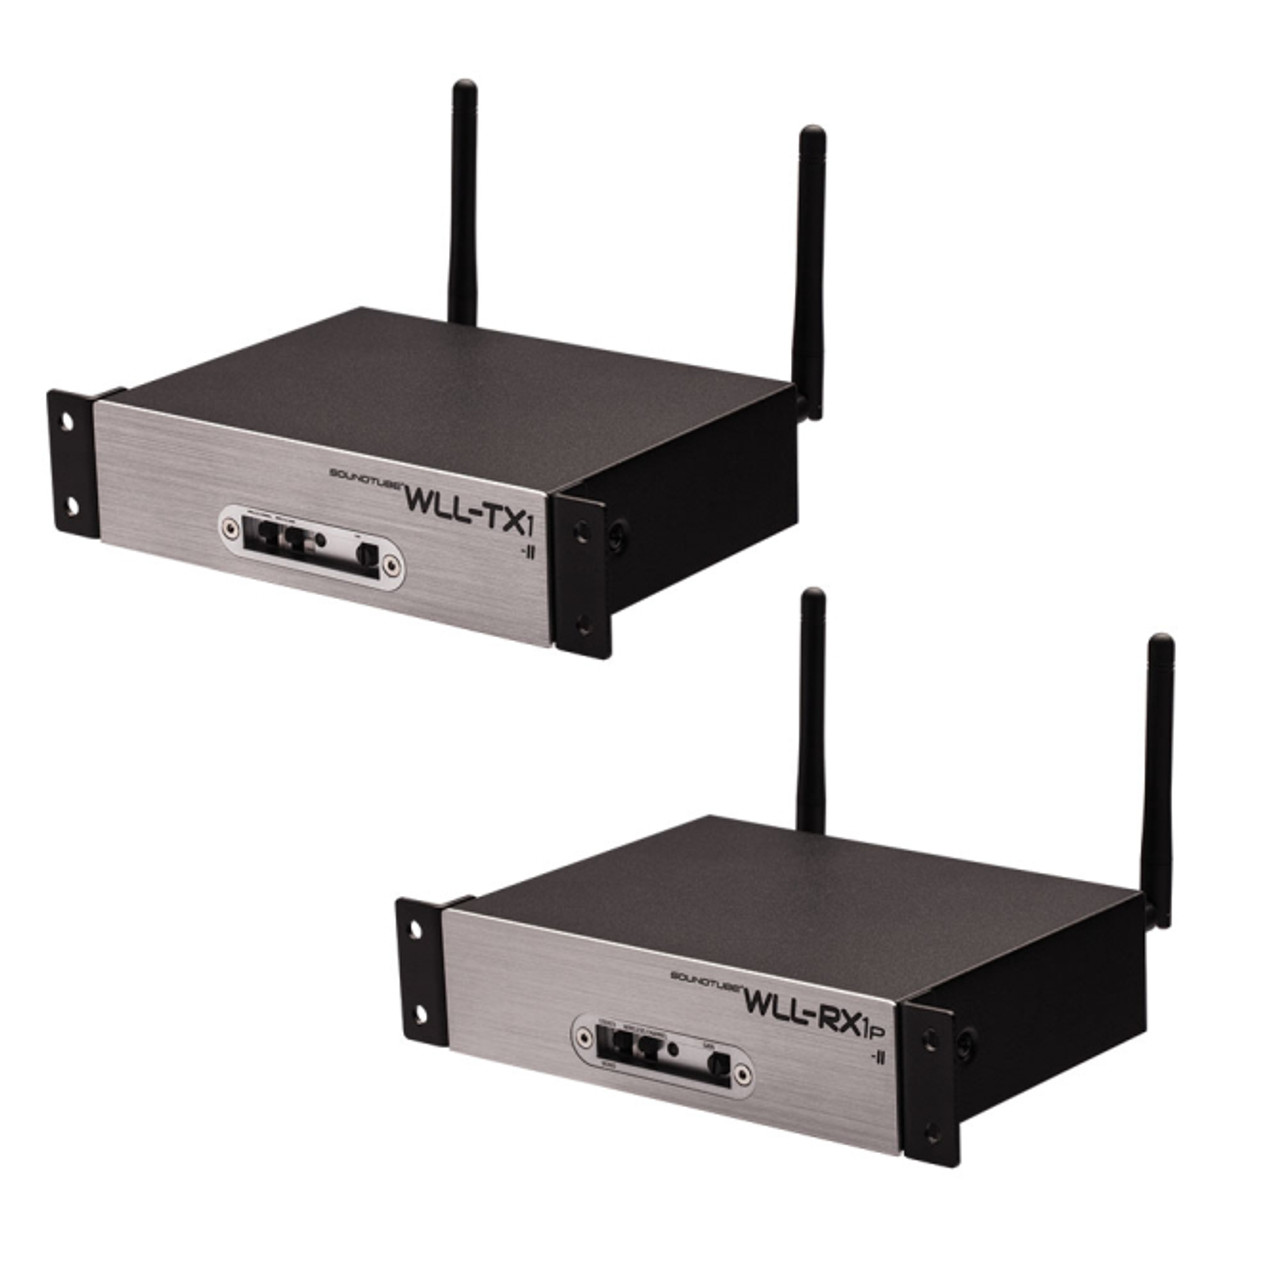 SoundTube WLL-TR-1P-II Tri-band Uncompressed Wireless WLL-TX1 Transmitter and WLL-RX1P Receiver System (WLL-TR-1P-II)